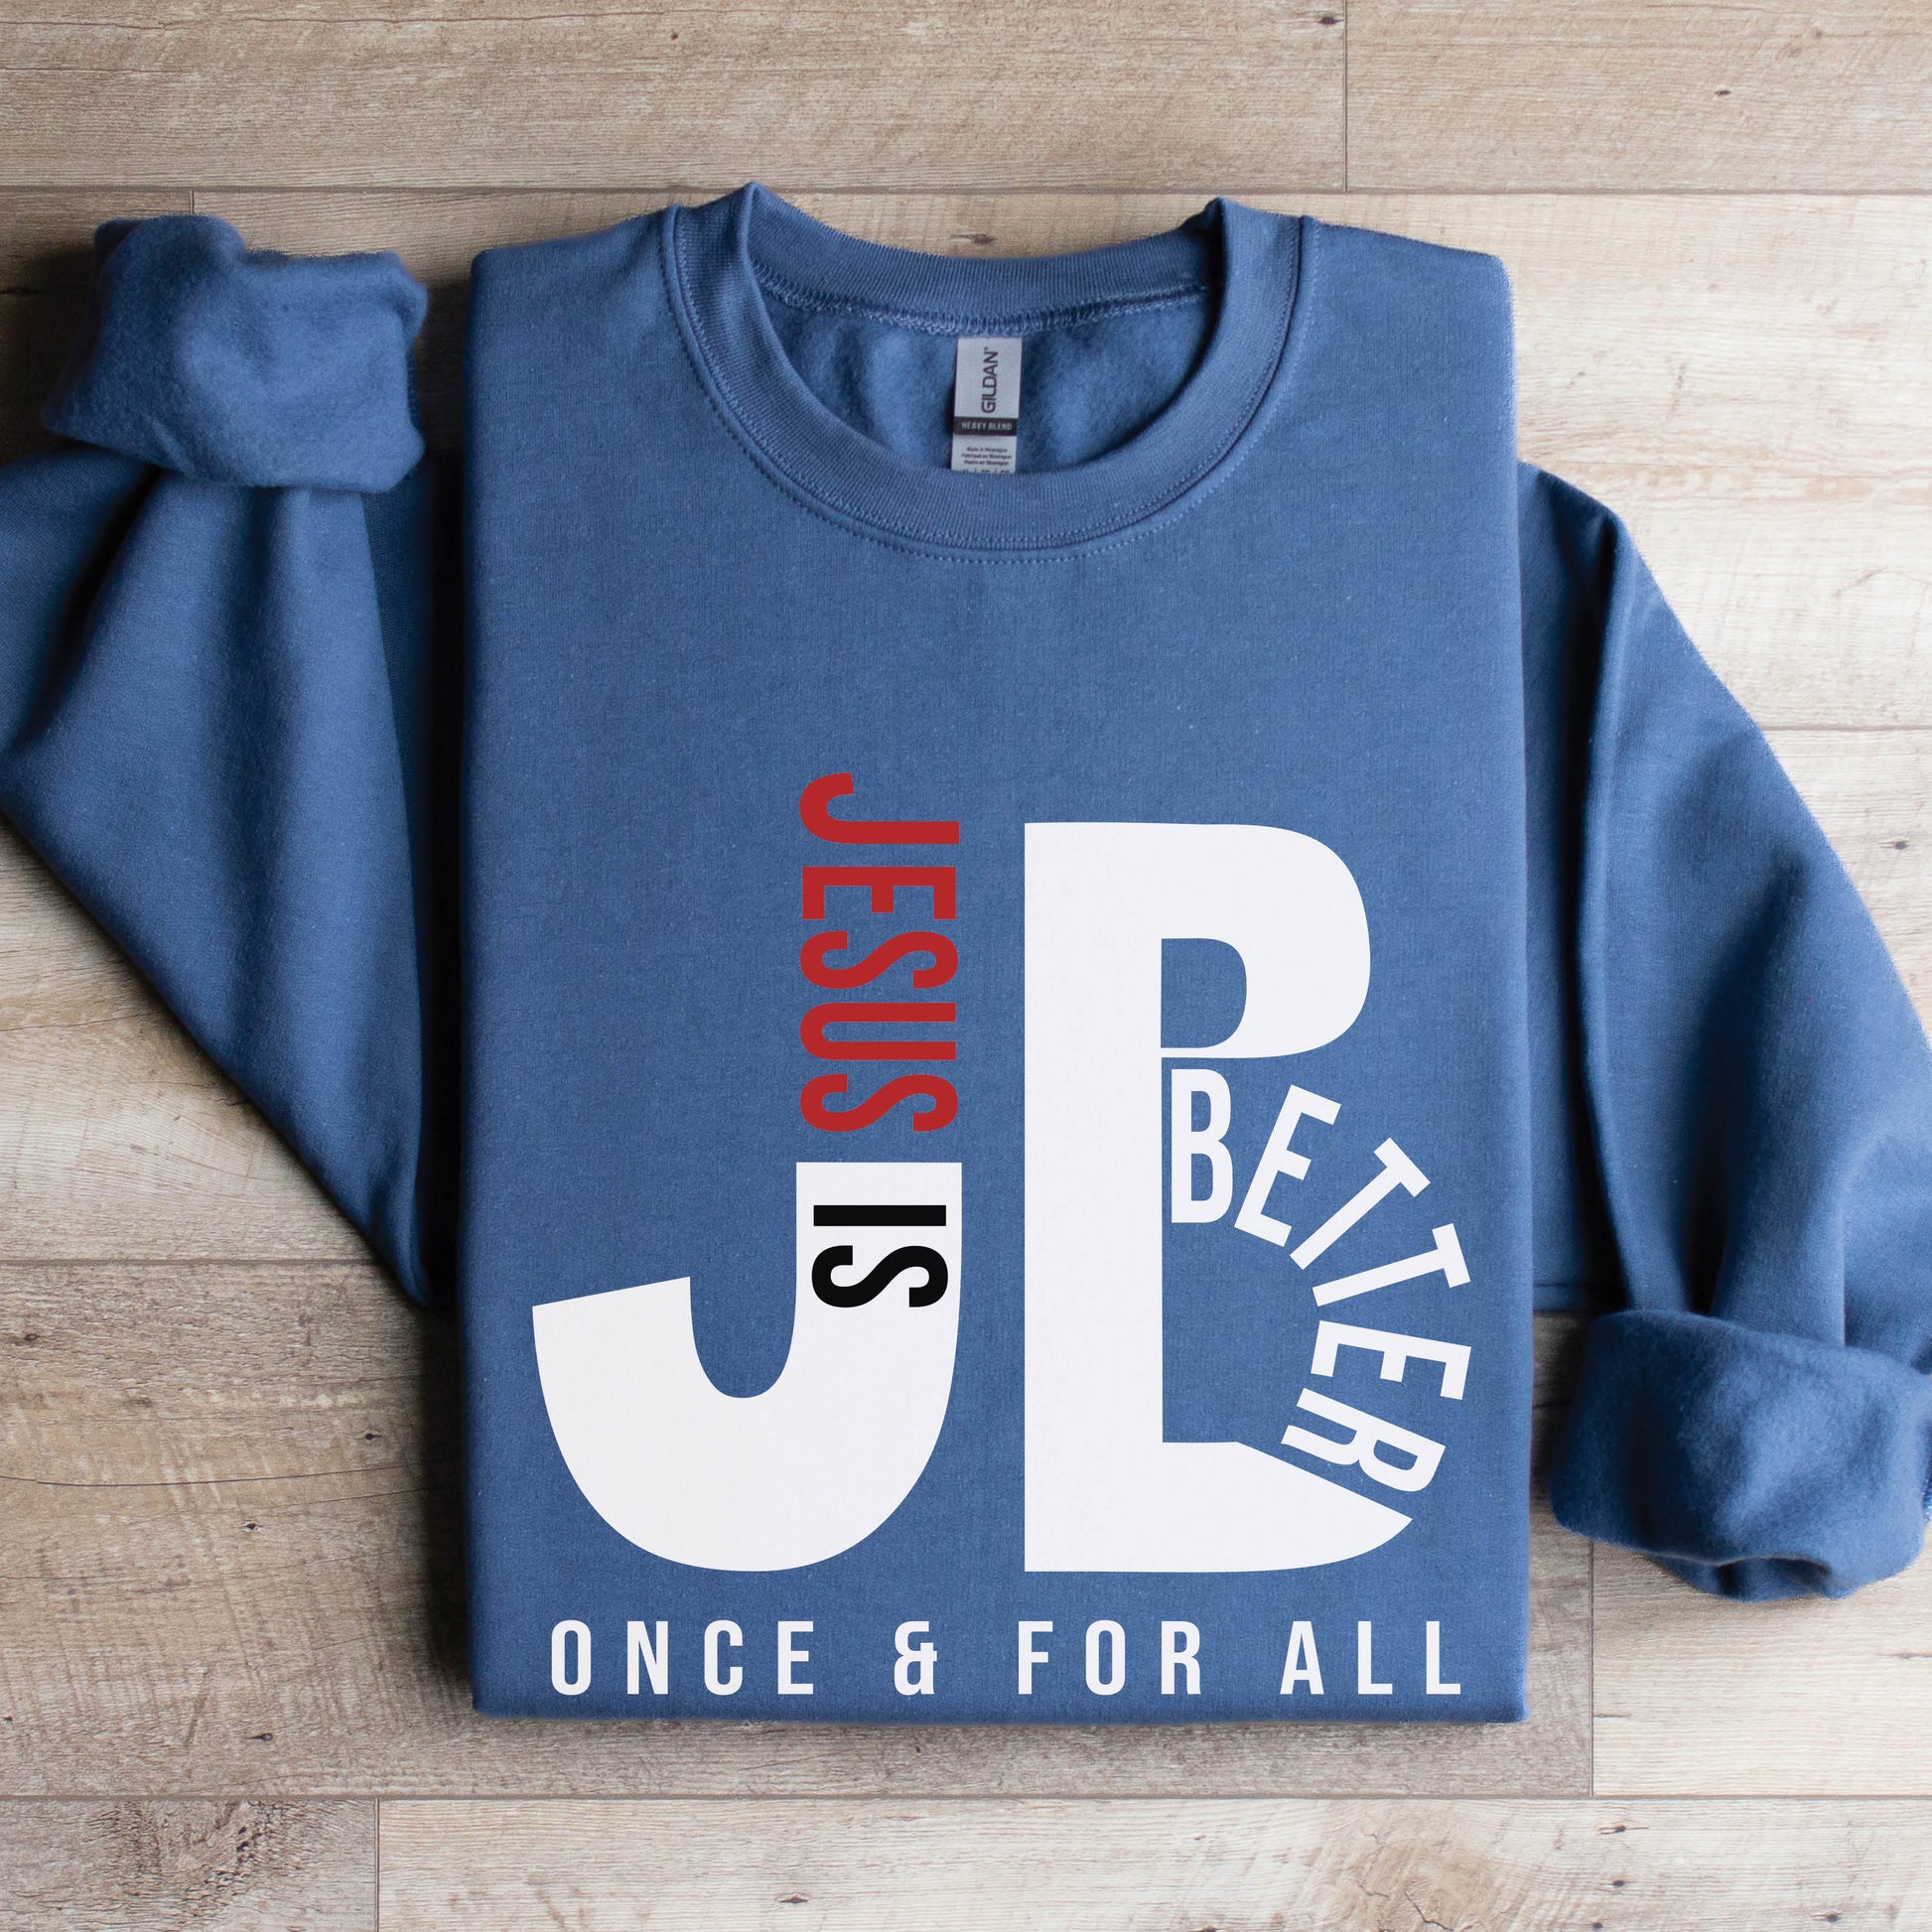 Cozy "JB" typography "Jesus is Better Once and For All" design in white and red letters, based on the Christian bible book of Hebrews, printed on a indigo blue color Unisex crewneck sweatshirt, created for faith-based men and women